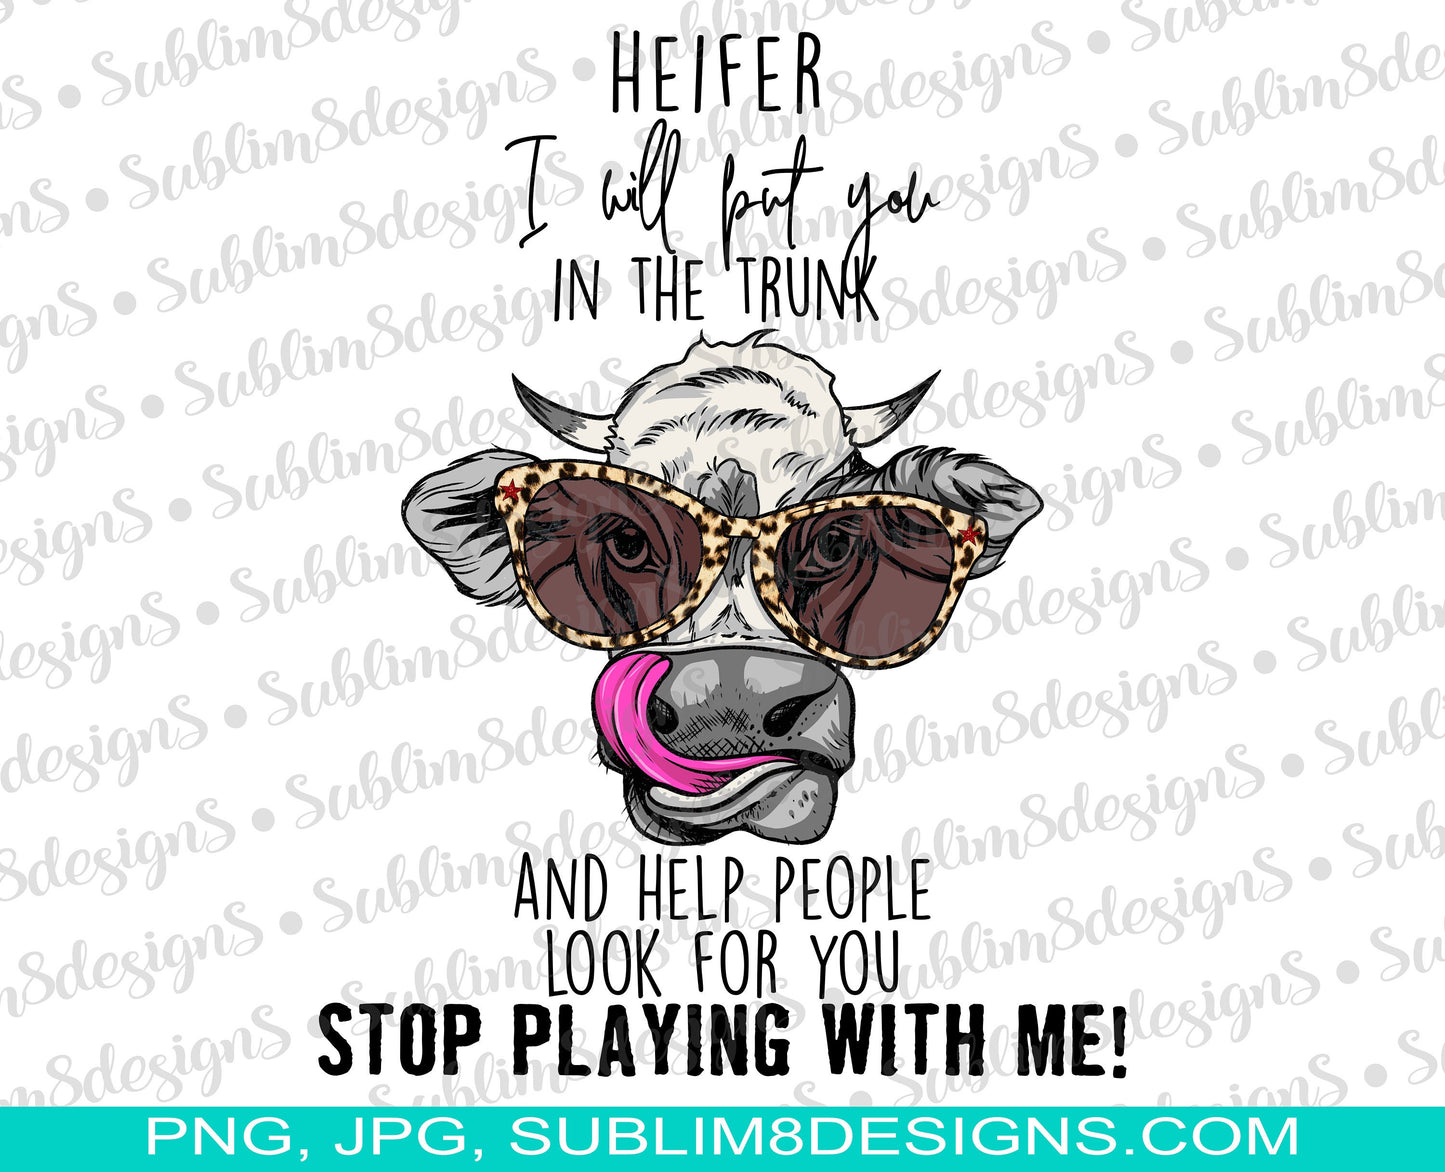 Heifer I Will Put You In The Trunk And Help People Look For You Stop Playing Me PNG and JPG ONLY